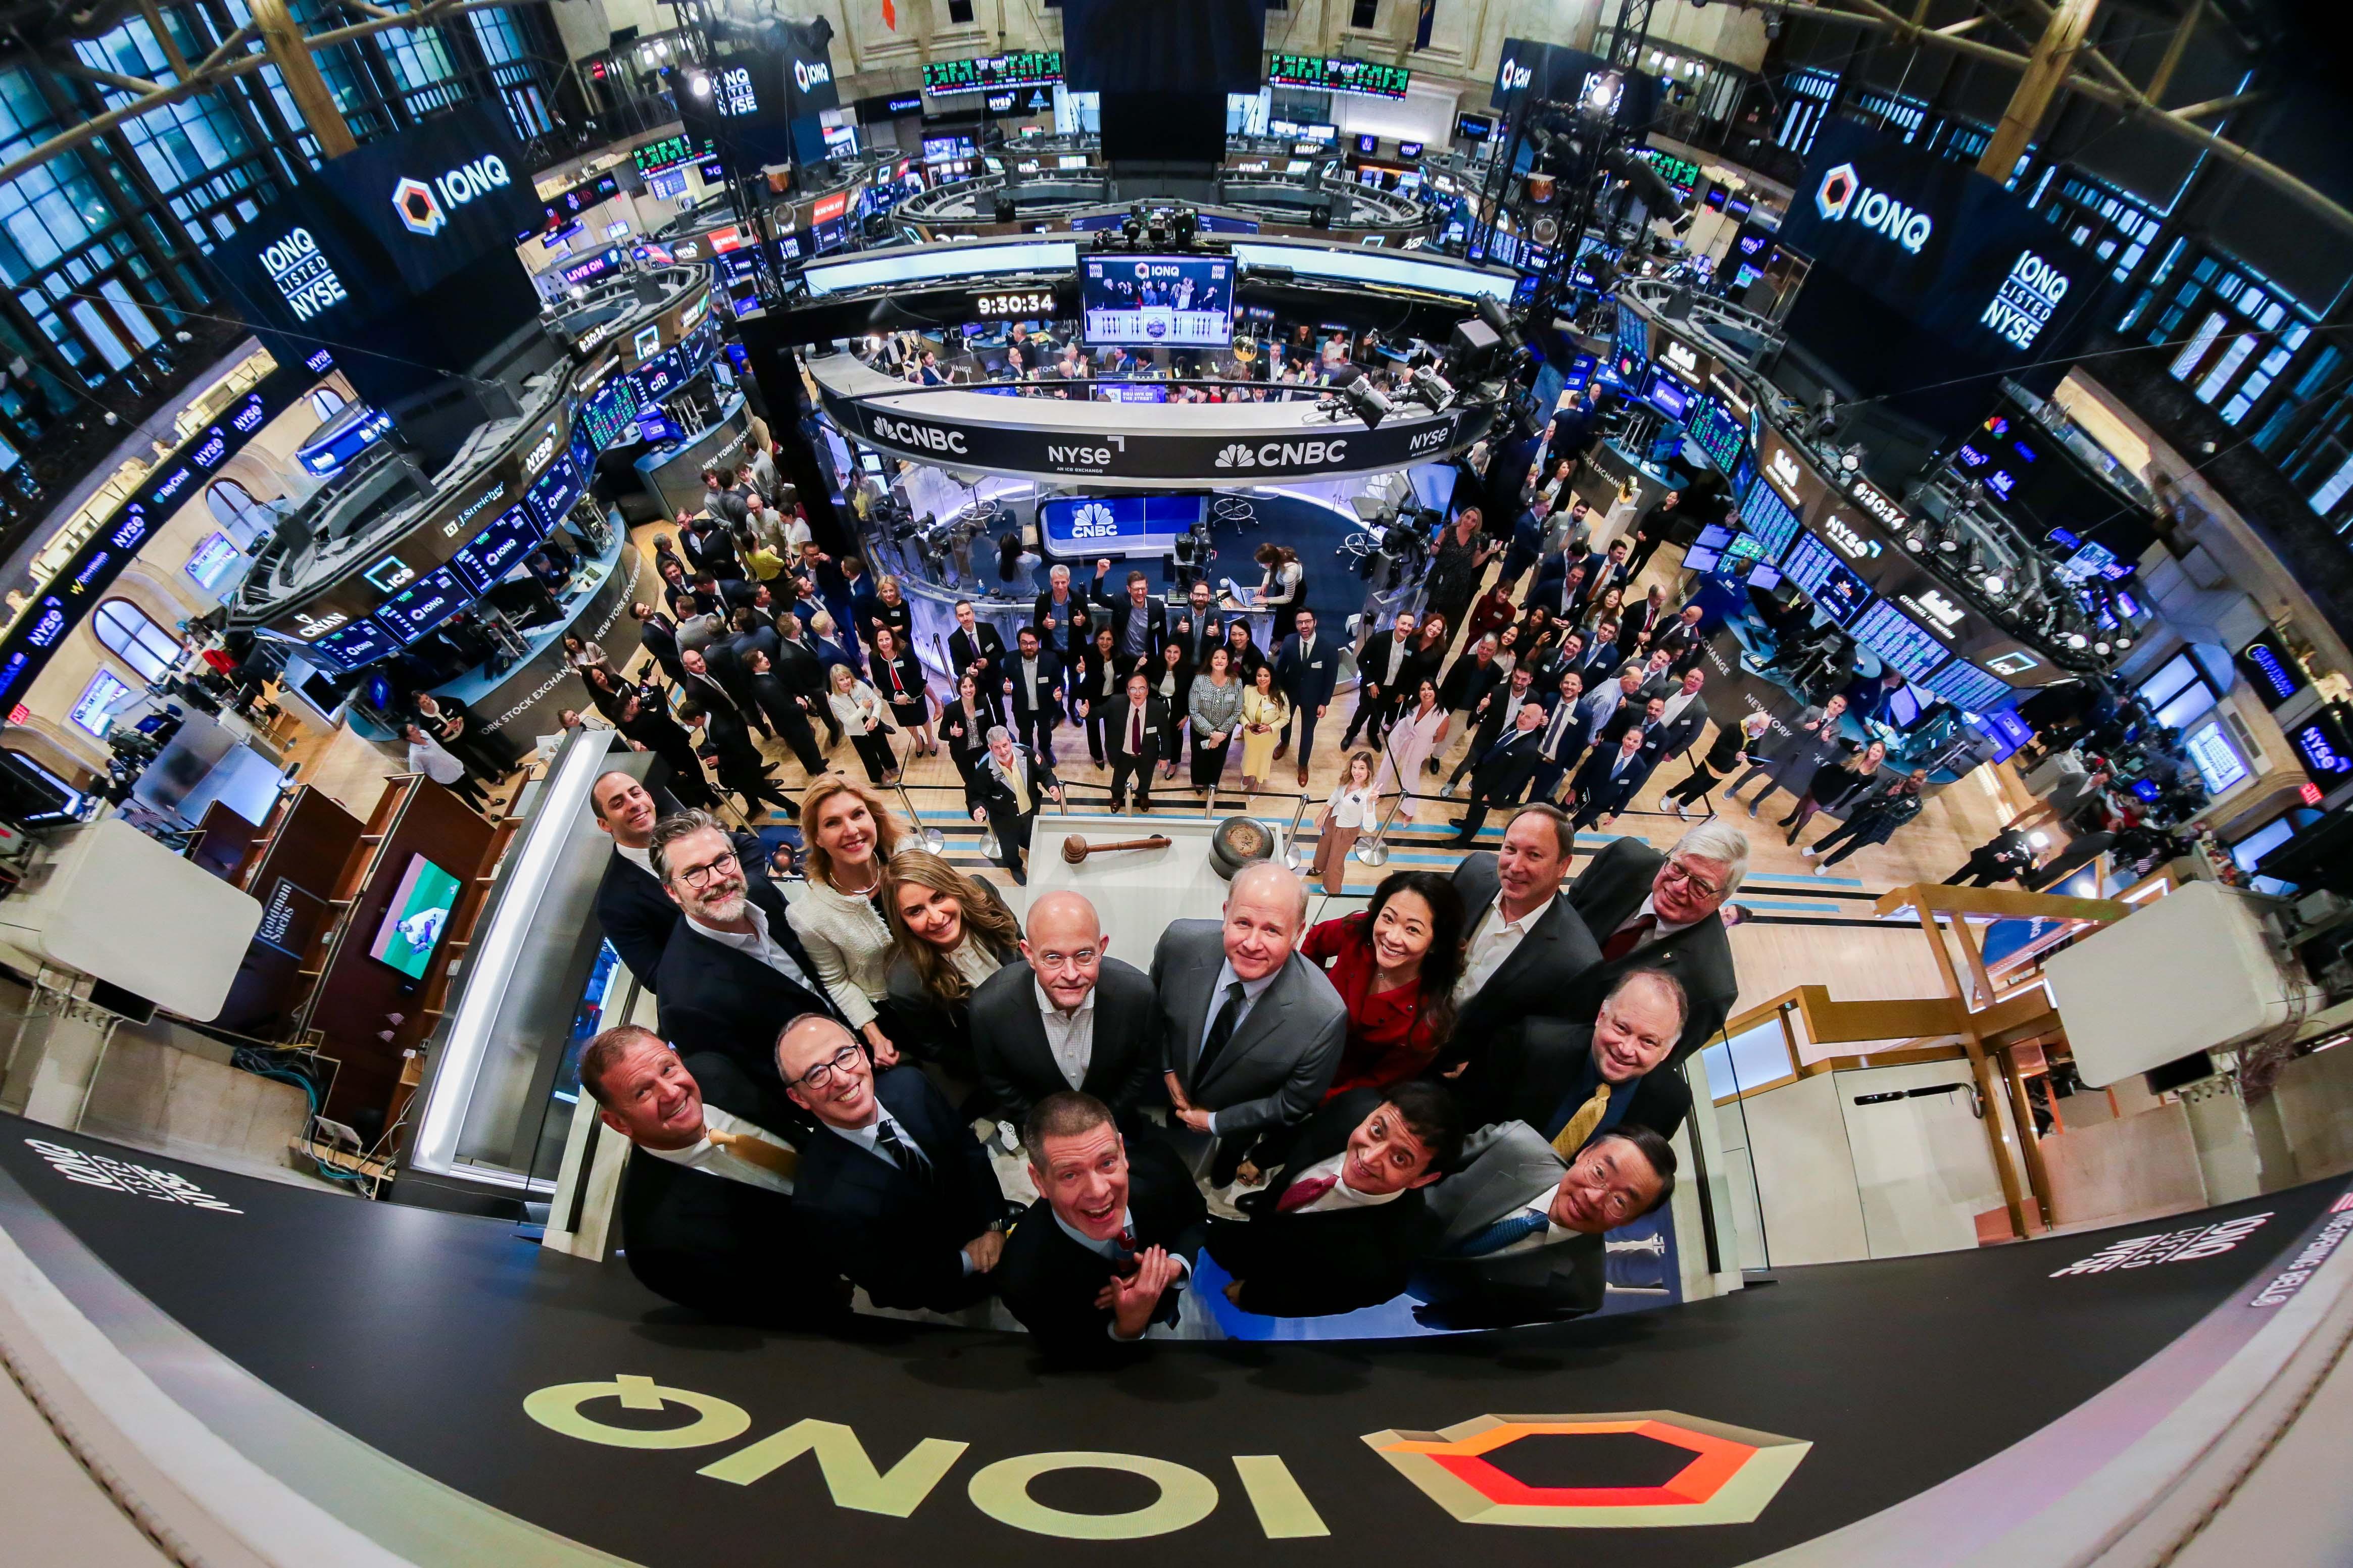 IonQ and UMD Ring the Opening Bell at the New York Stock Exchange